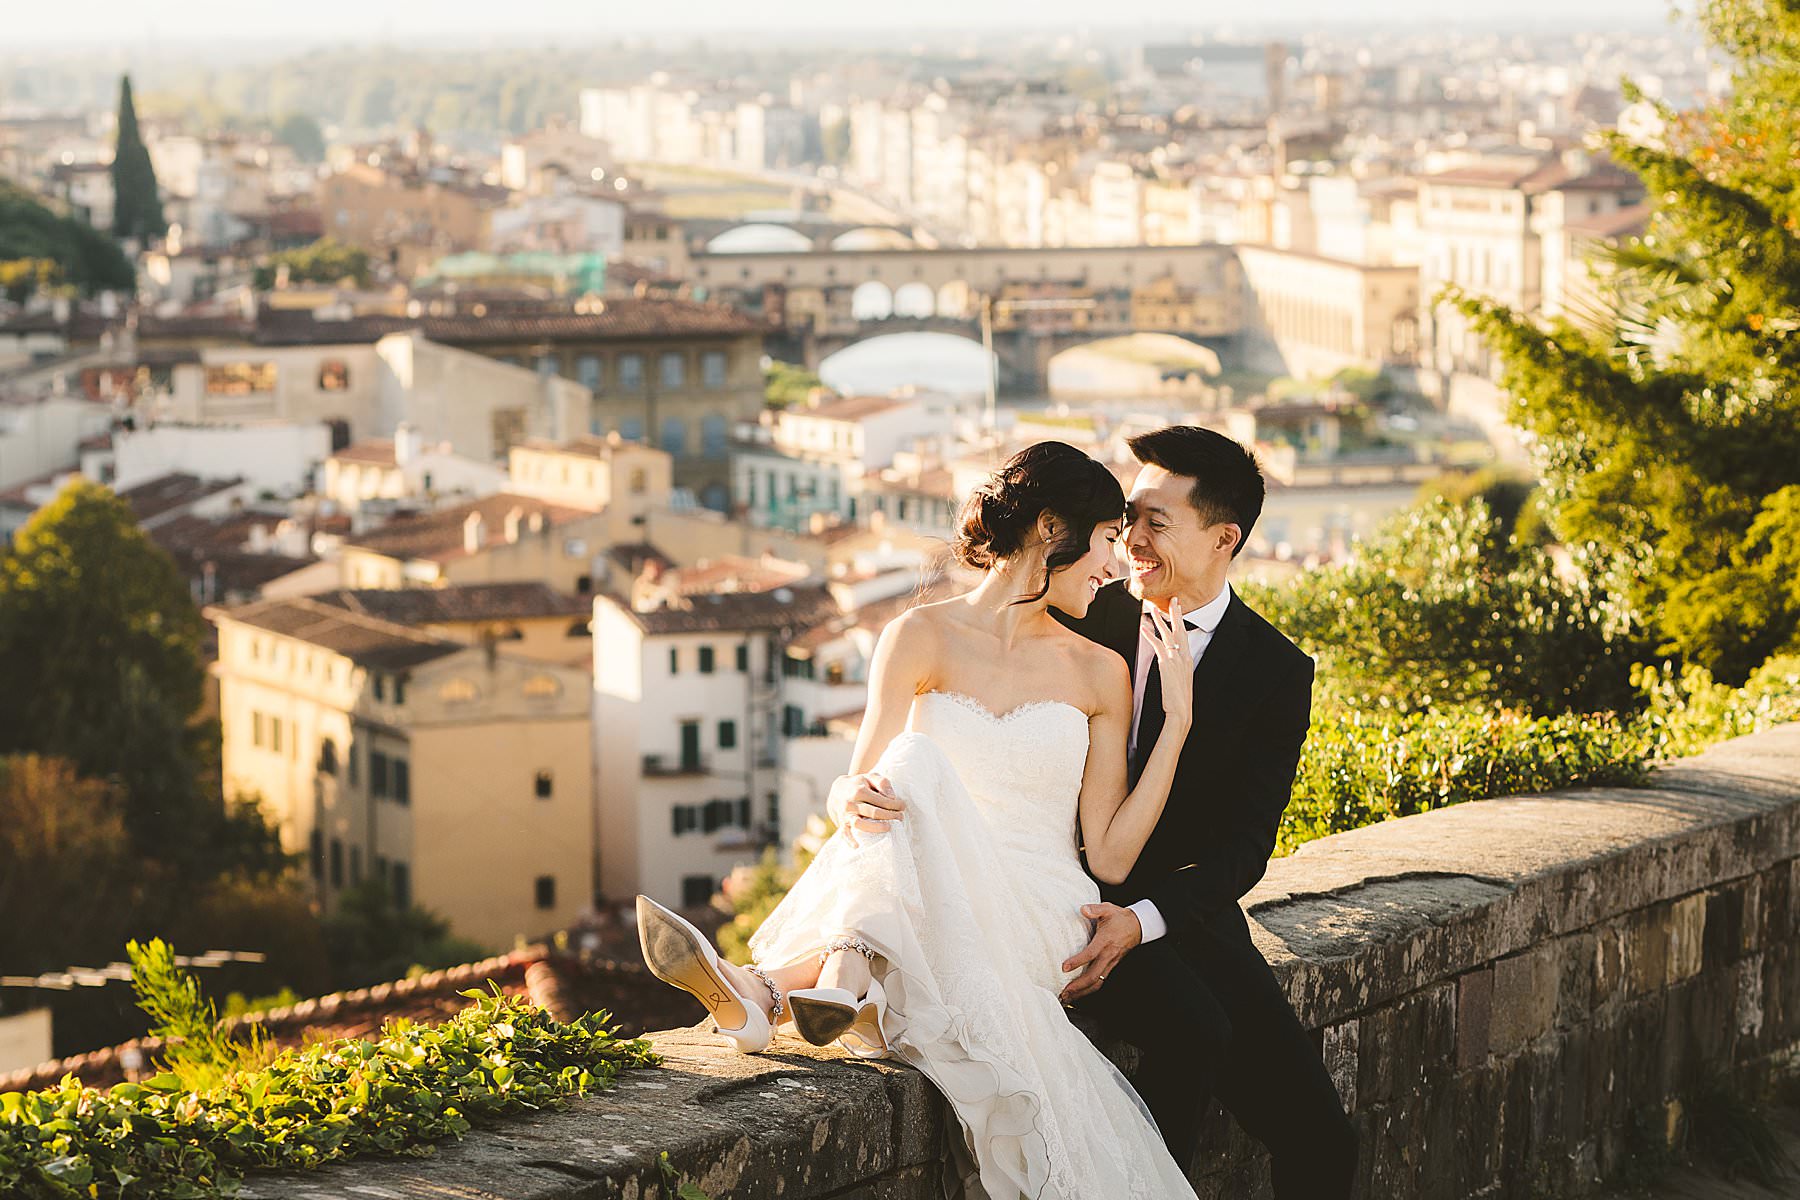 Lovely images of an unforgettable honeymoon in Florence wearing wedding outfits